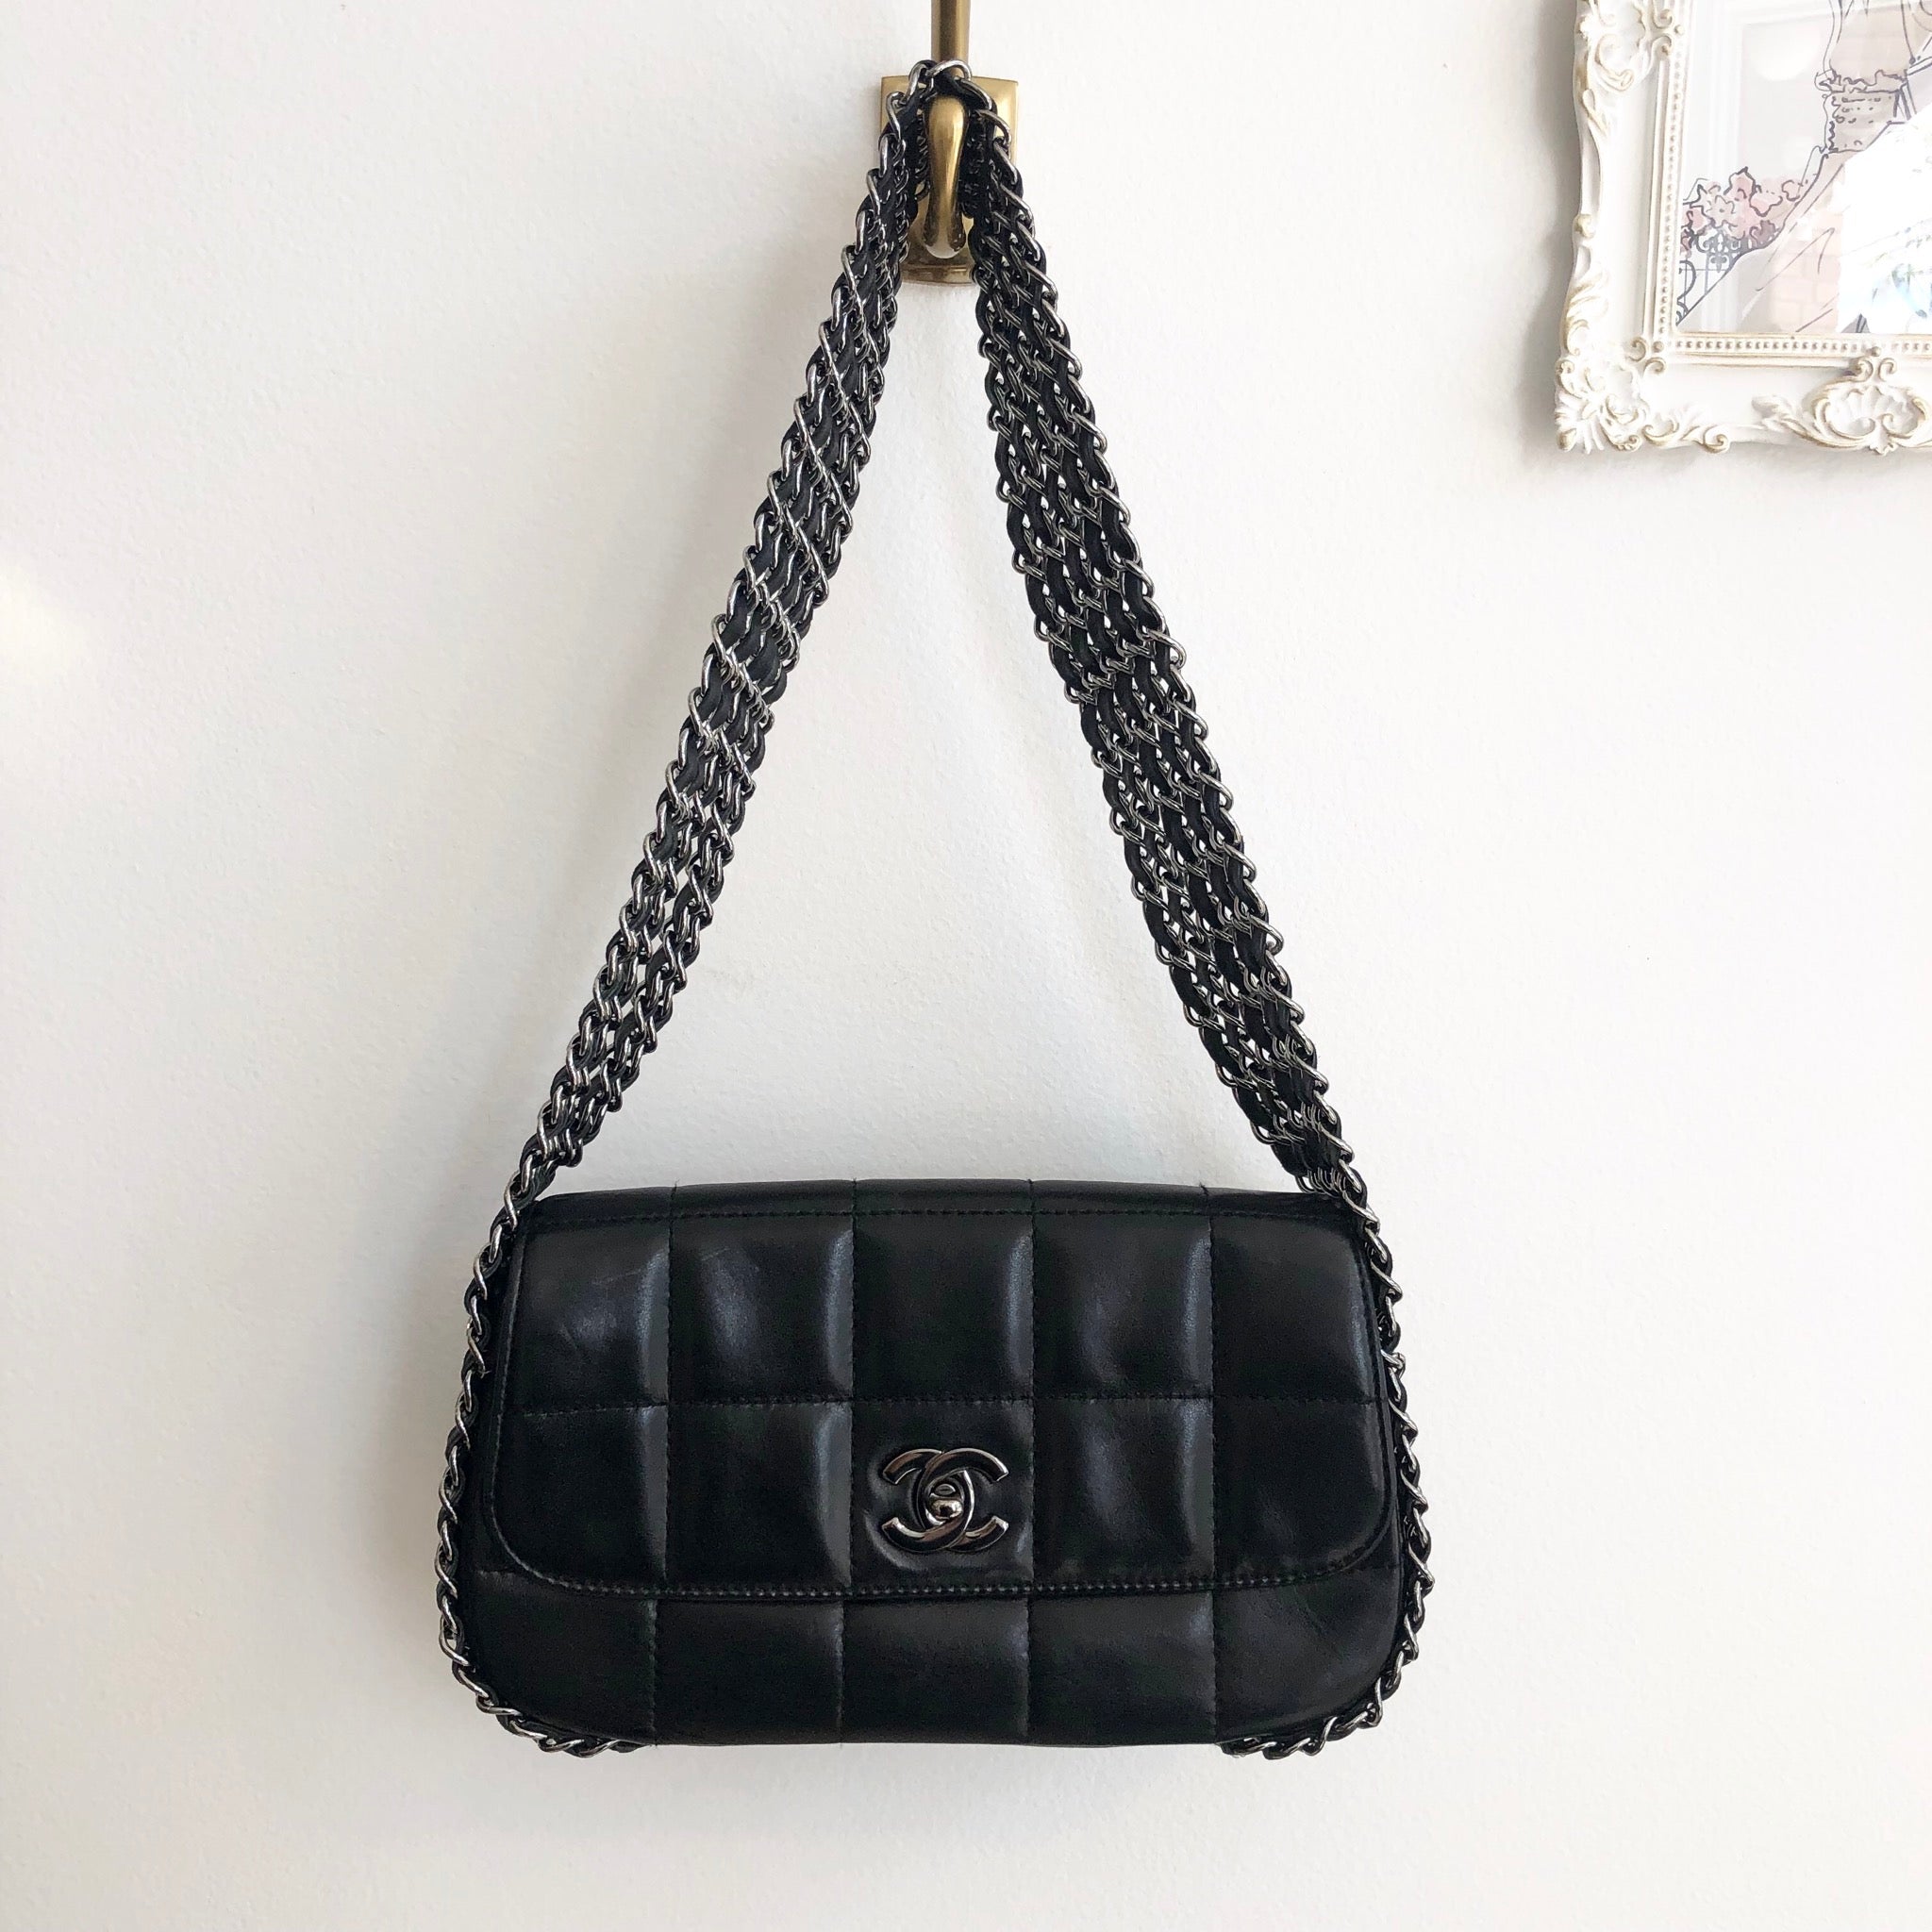 Chanel Chanel Black Quilted Leather 255 9 Shoulder Bag Gold Chain 